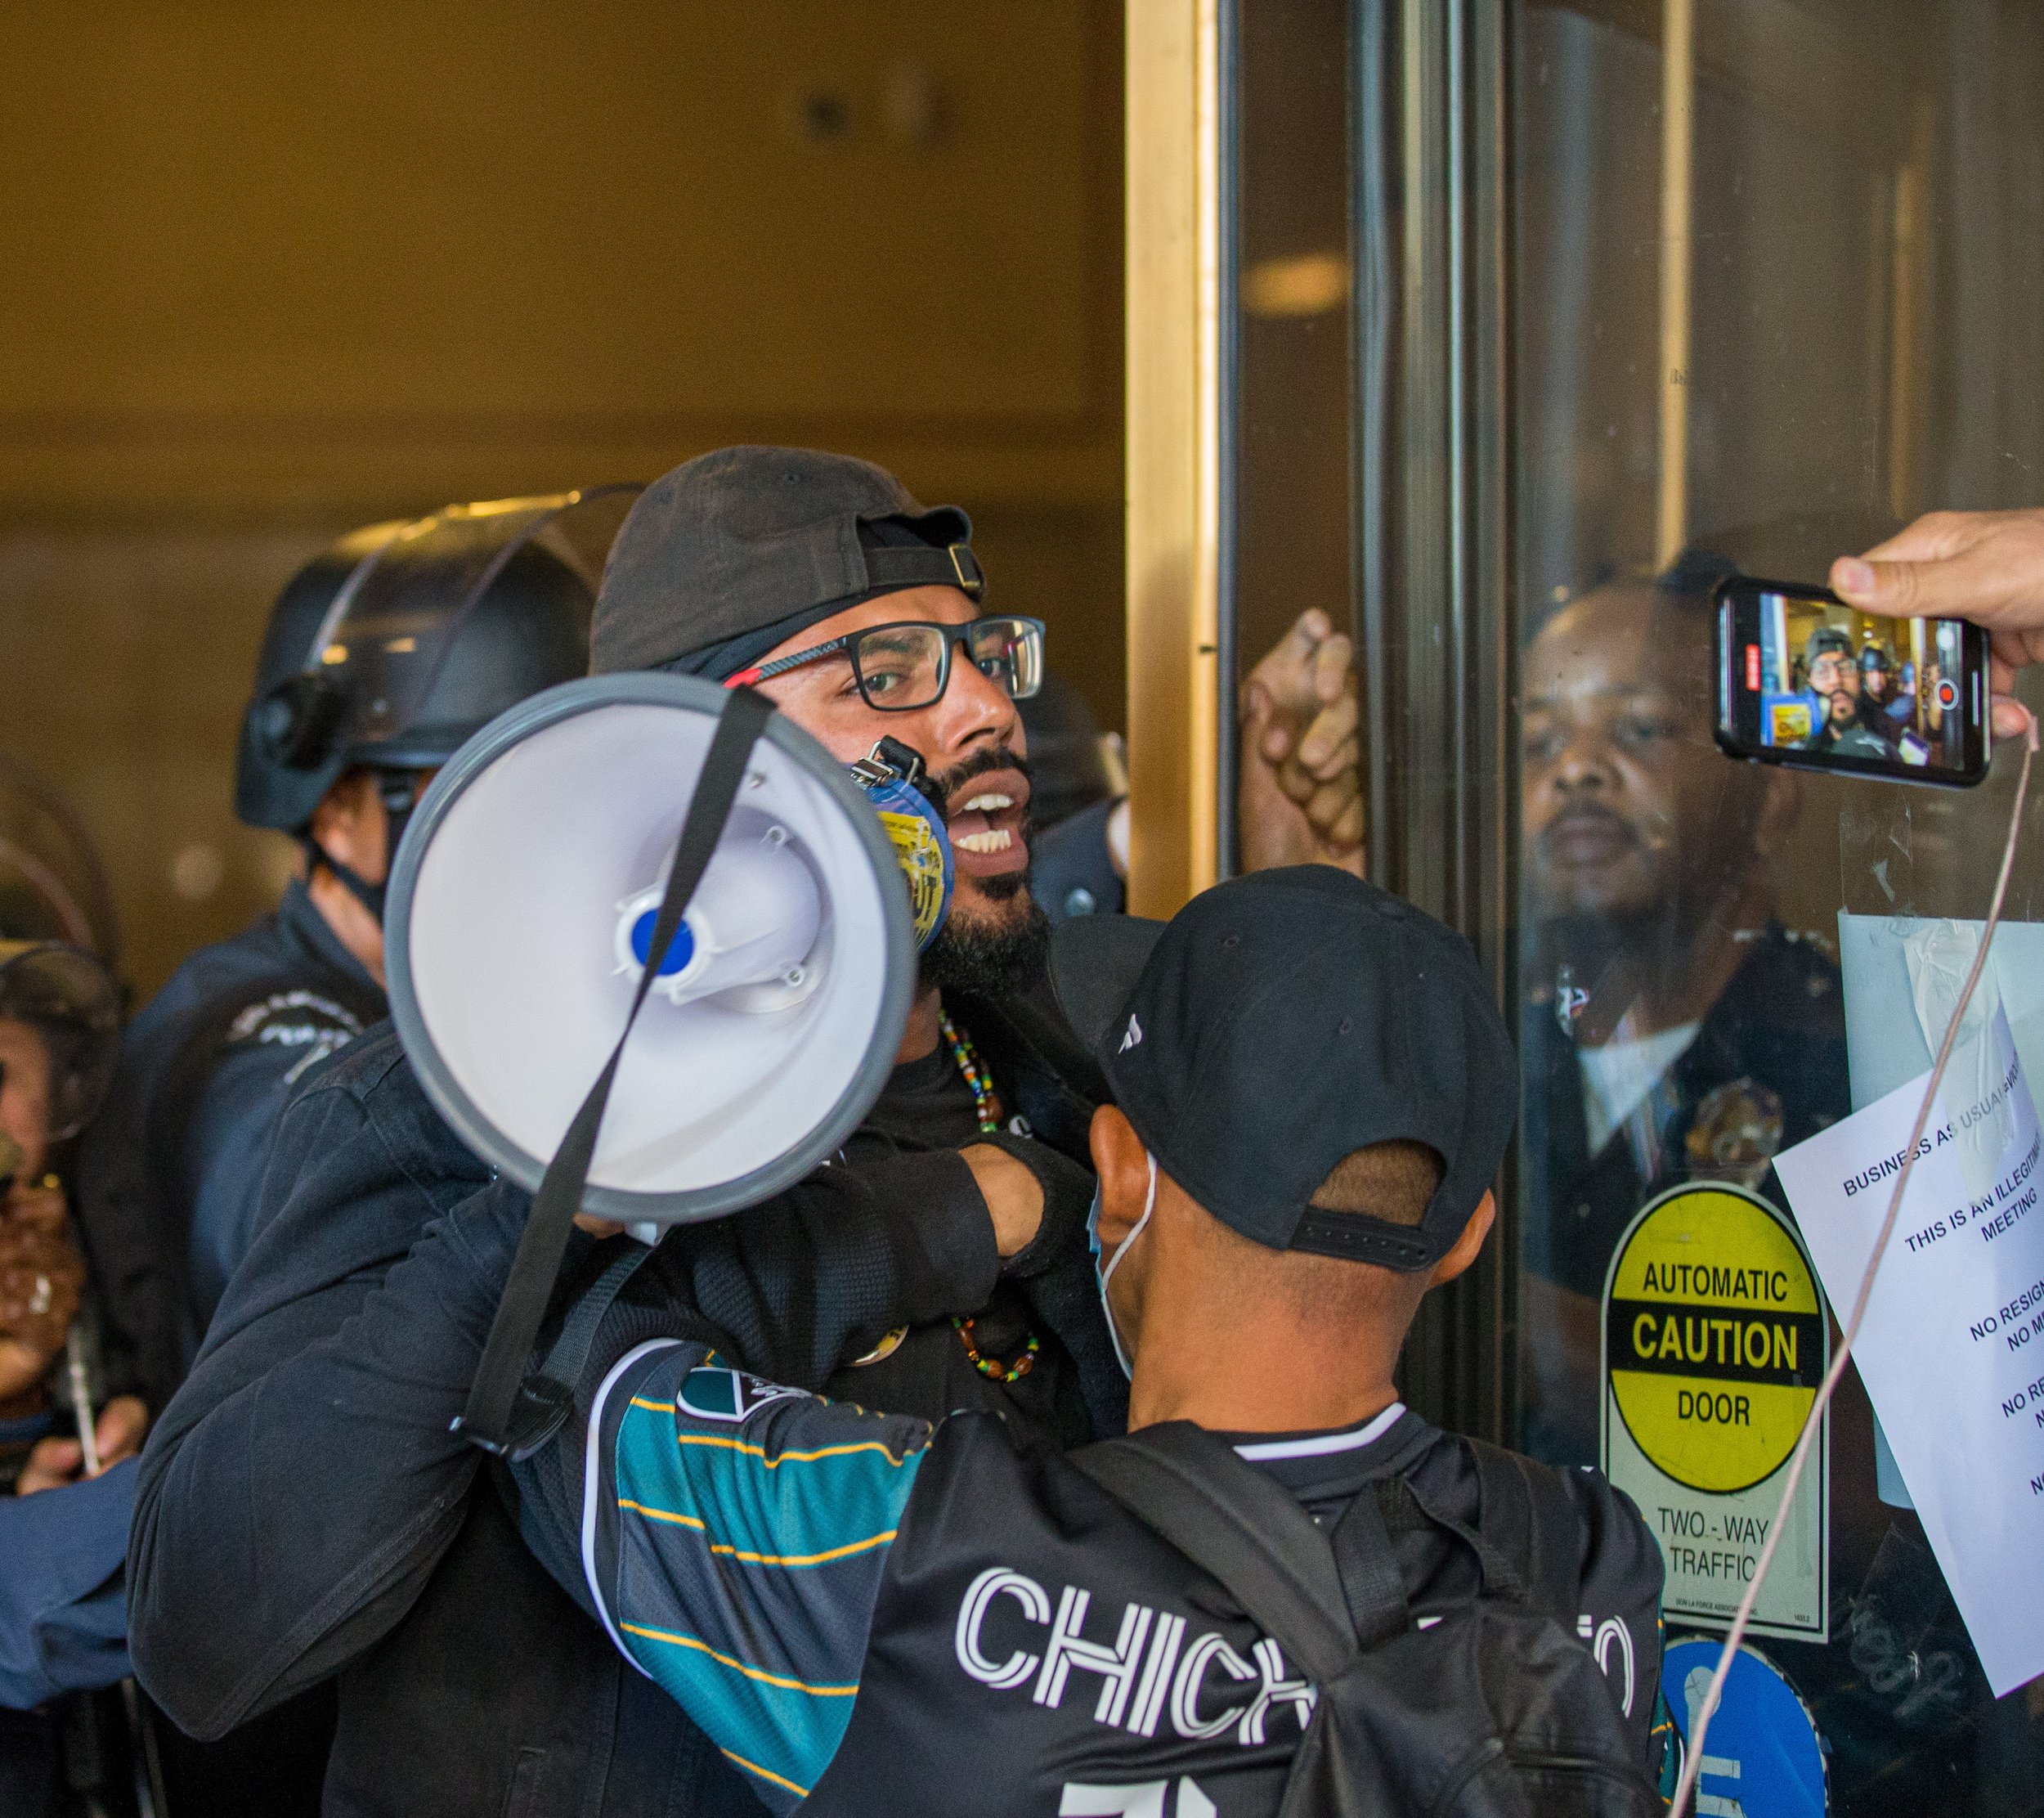  Joseph Williams(L) being pushed outside of the Los Angeles City Hall by LAPD wearing riot gear after Williams and others made their way inside the city hall calling for the resignation of Kevin De Leon on Tuesday, Oct. 18 at Los Angeles, Calif. Afte